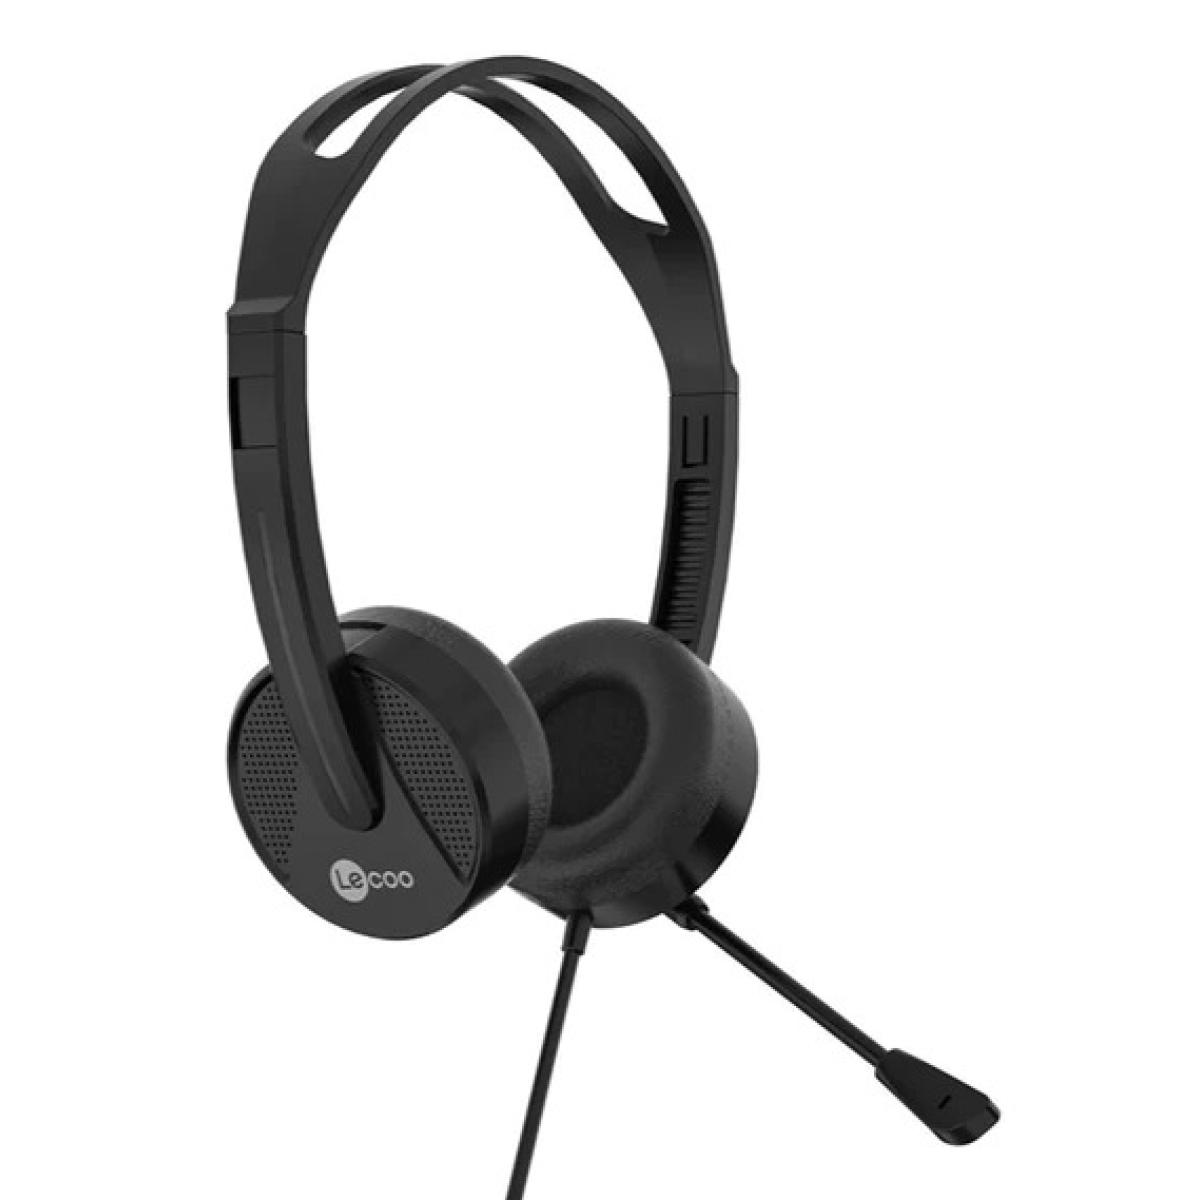 Lecoo HT106 Wired Headset- One Pin